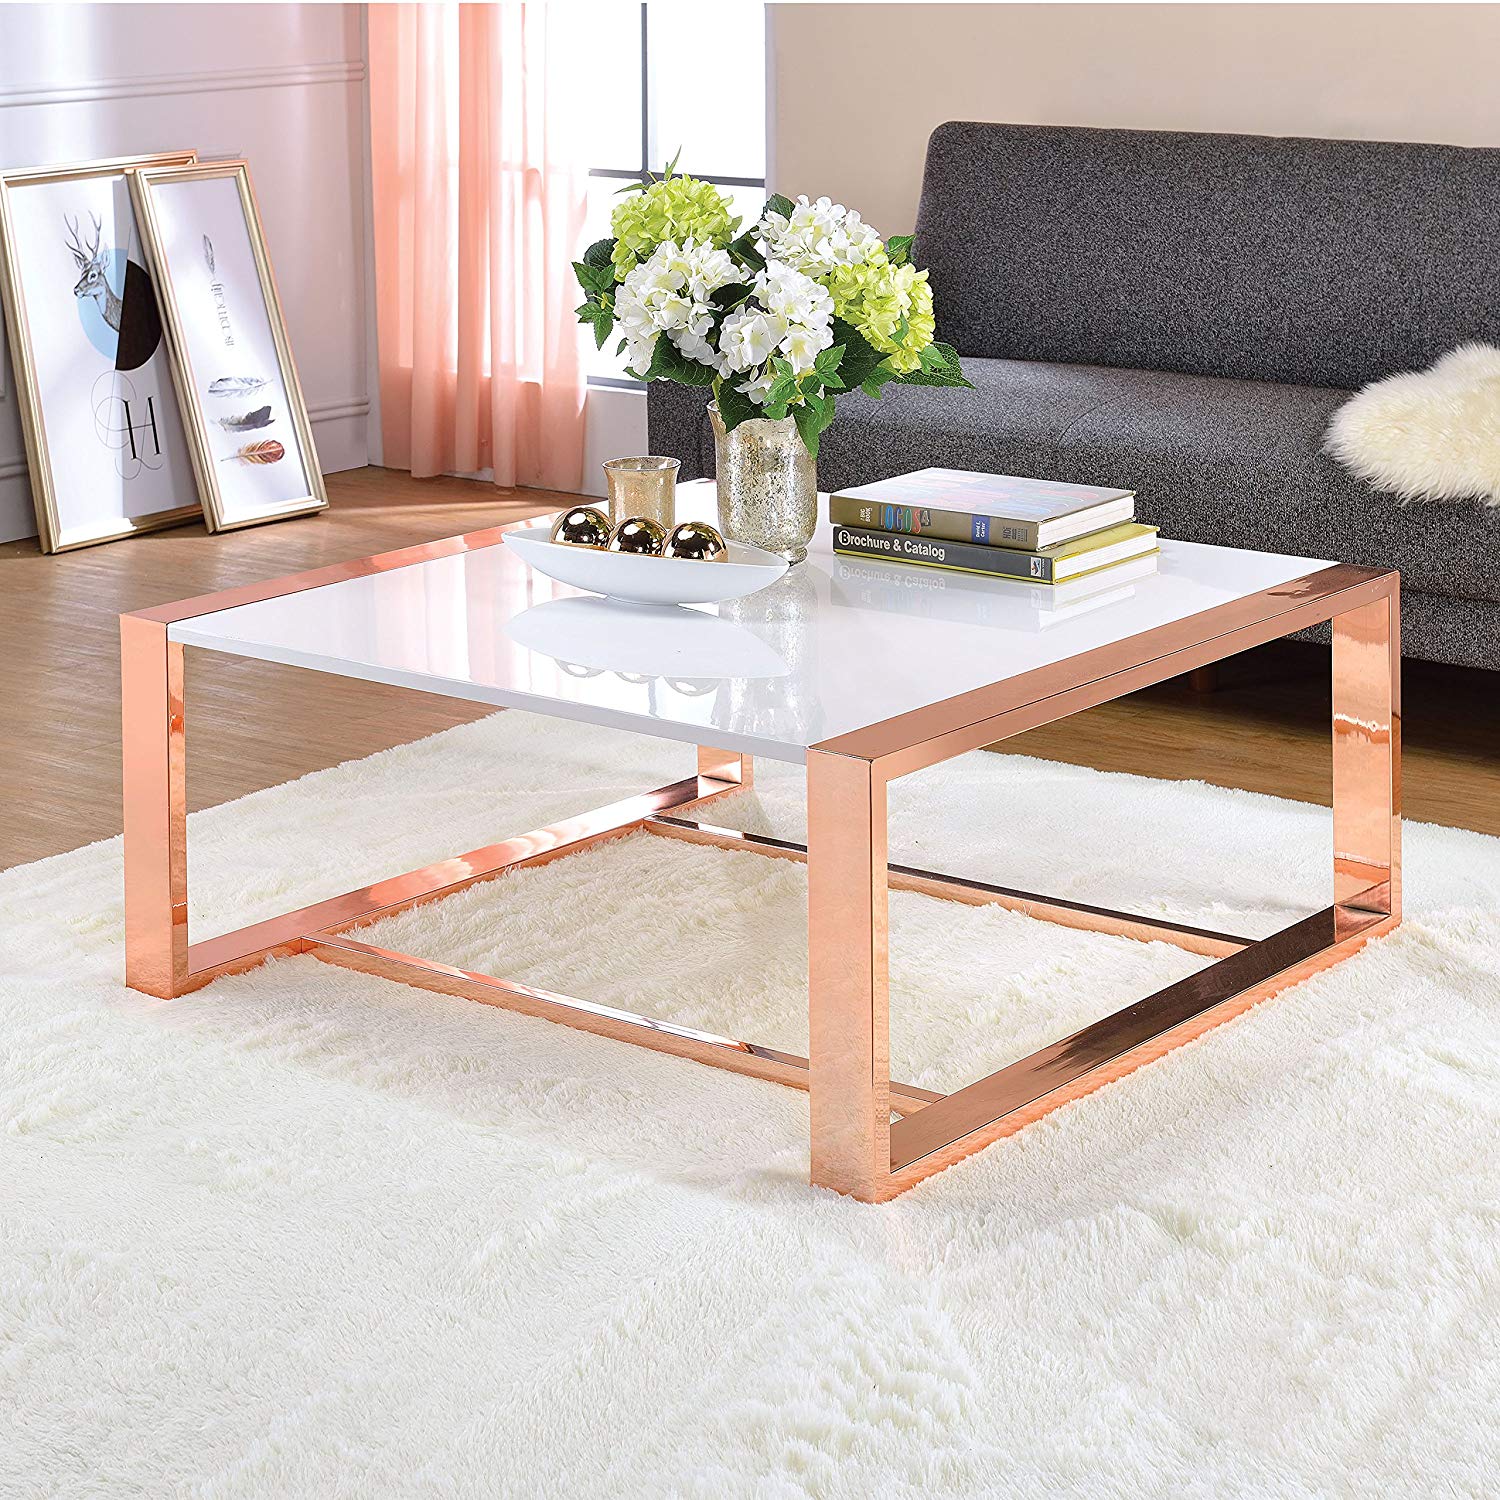 40" X 40" X 16" White High Gloss And Rose Gold Coffee Table